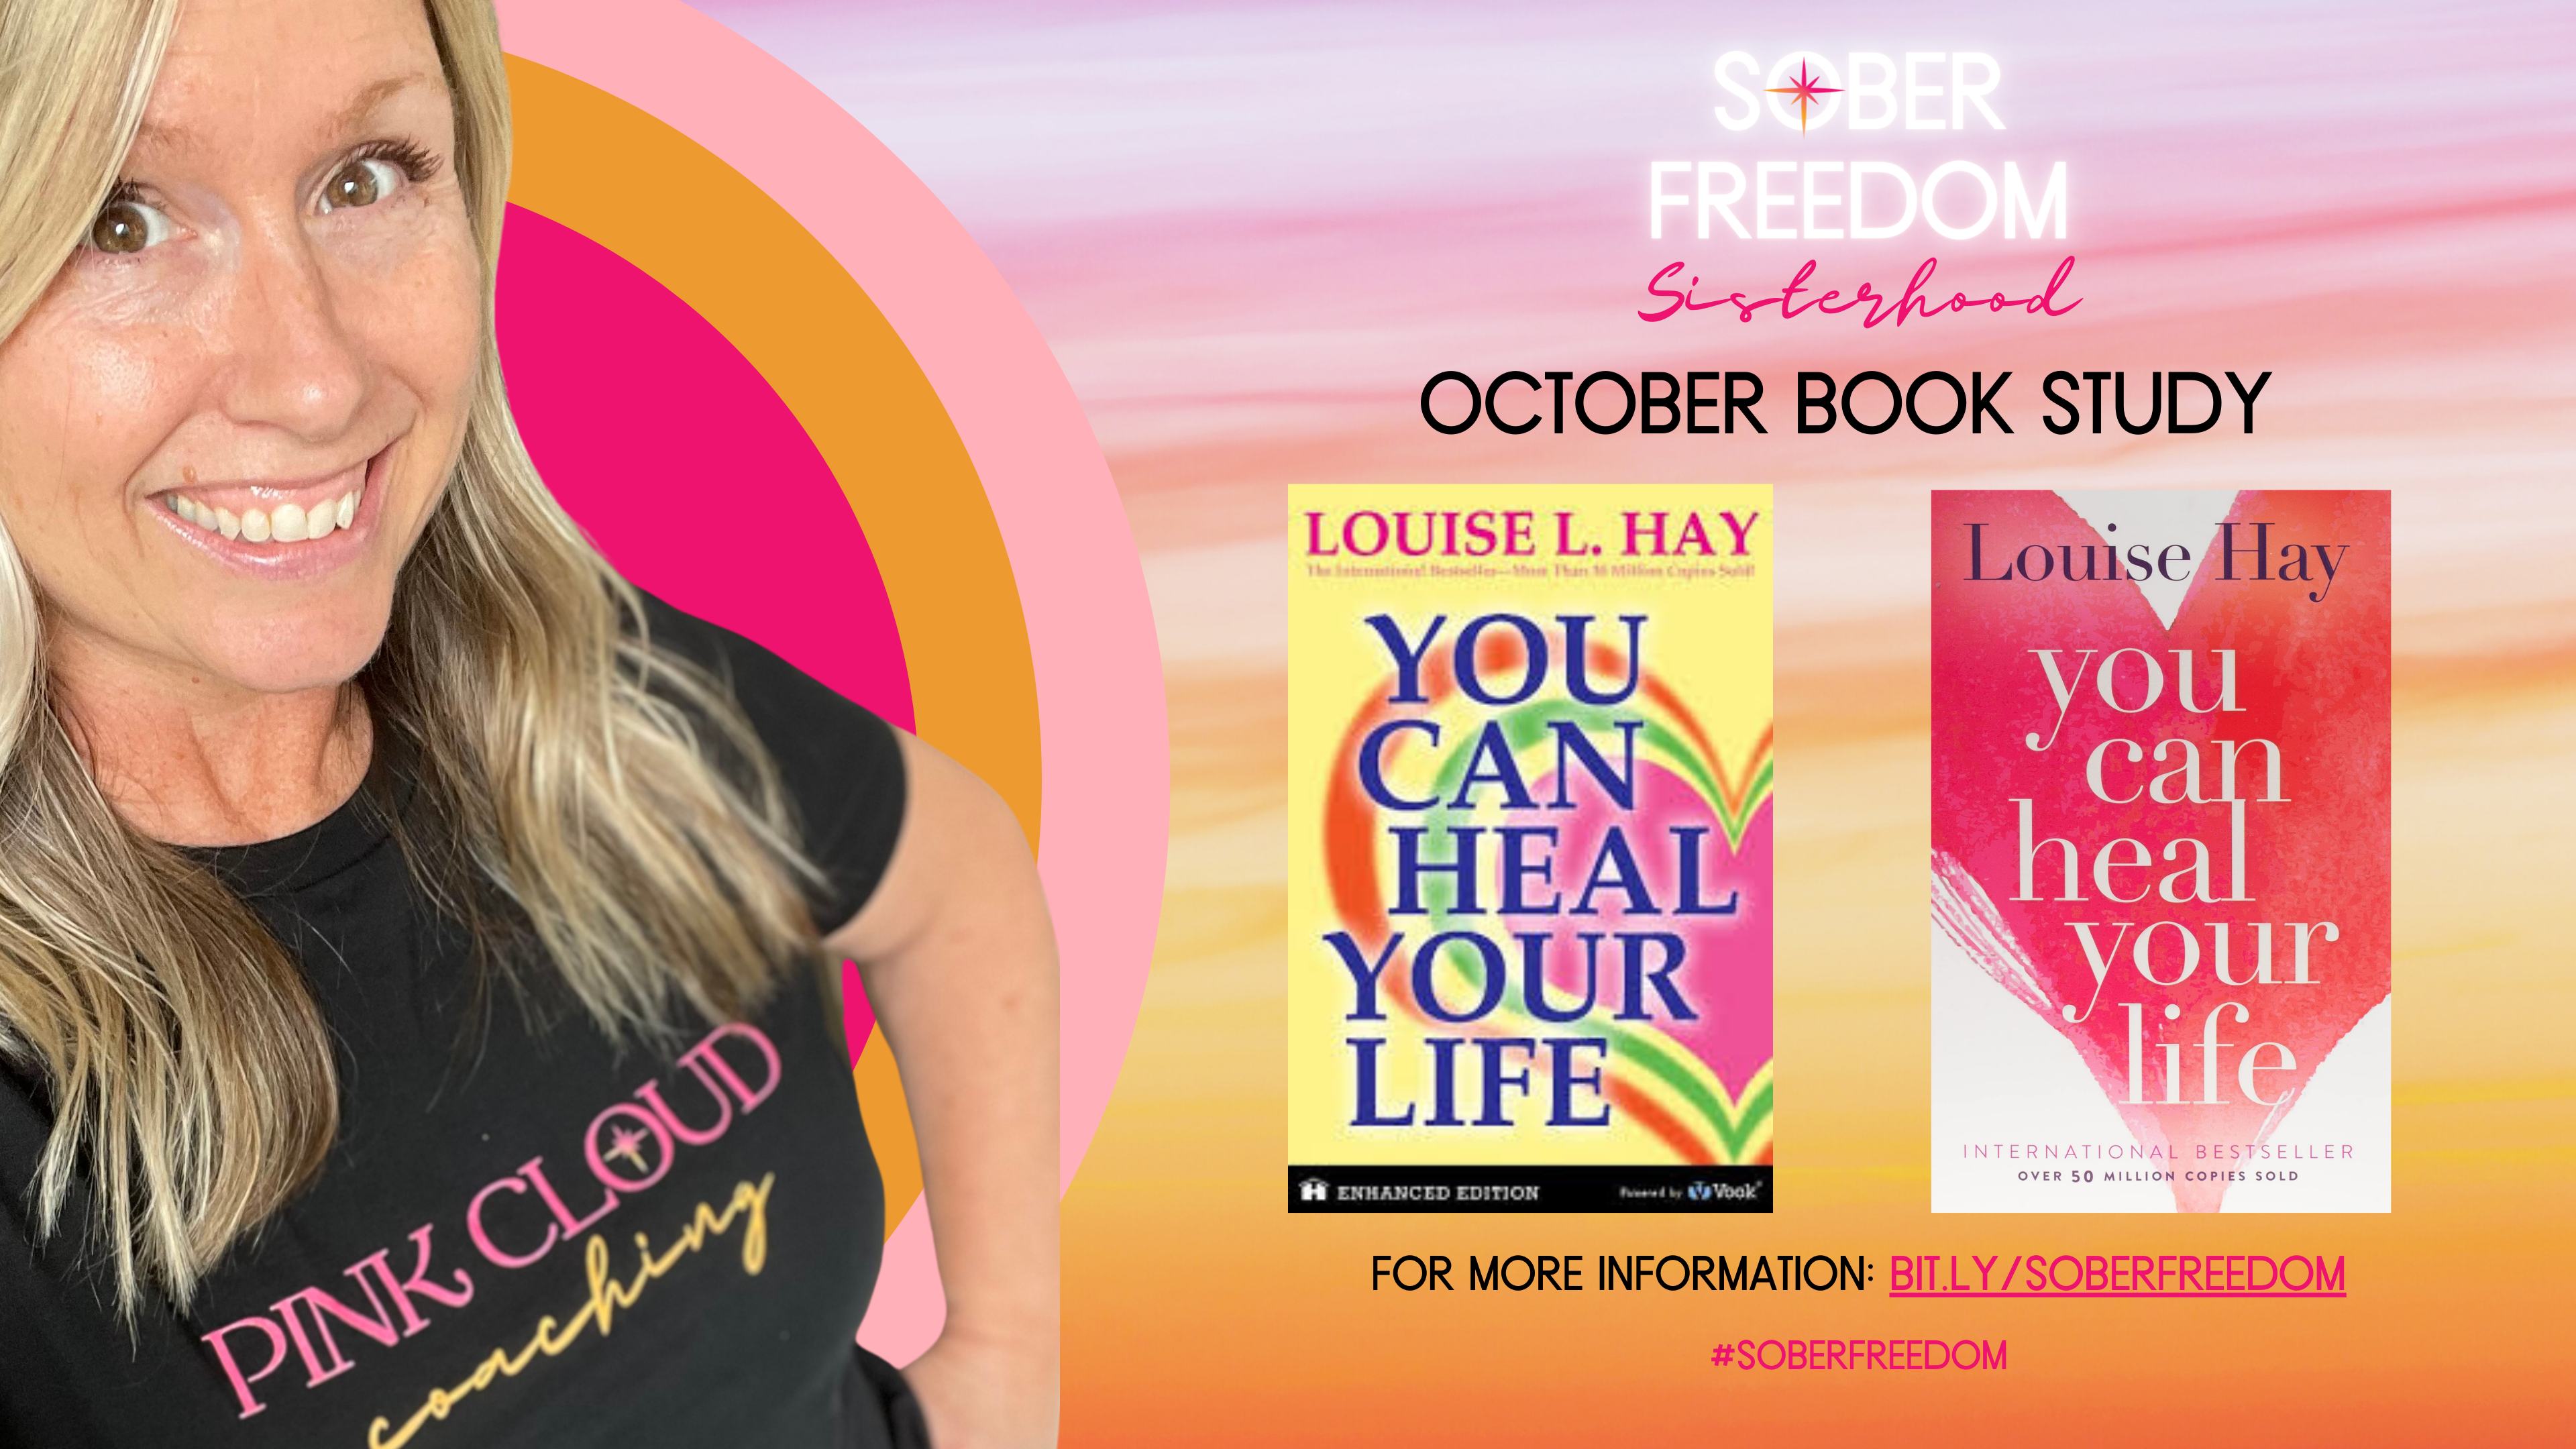 Sober Freedom Sisterhood Book Study Louise Hay You can heal your life